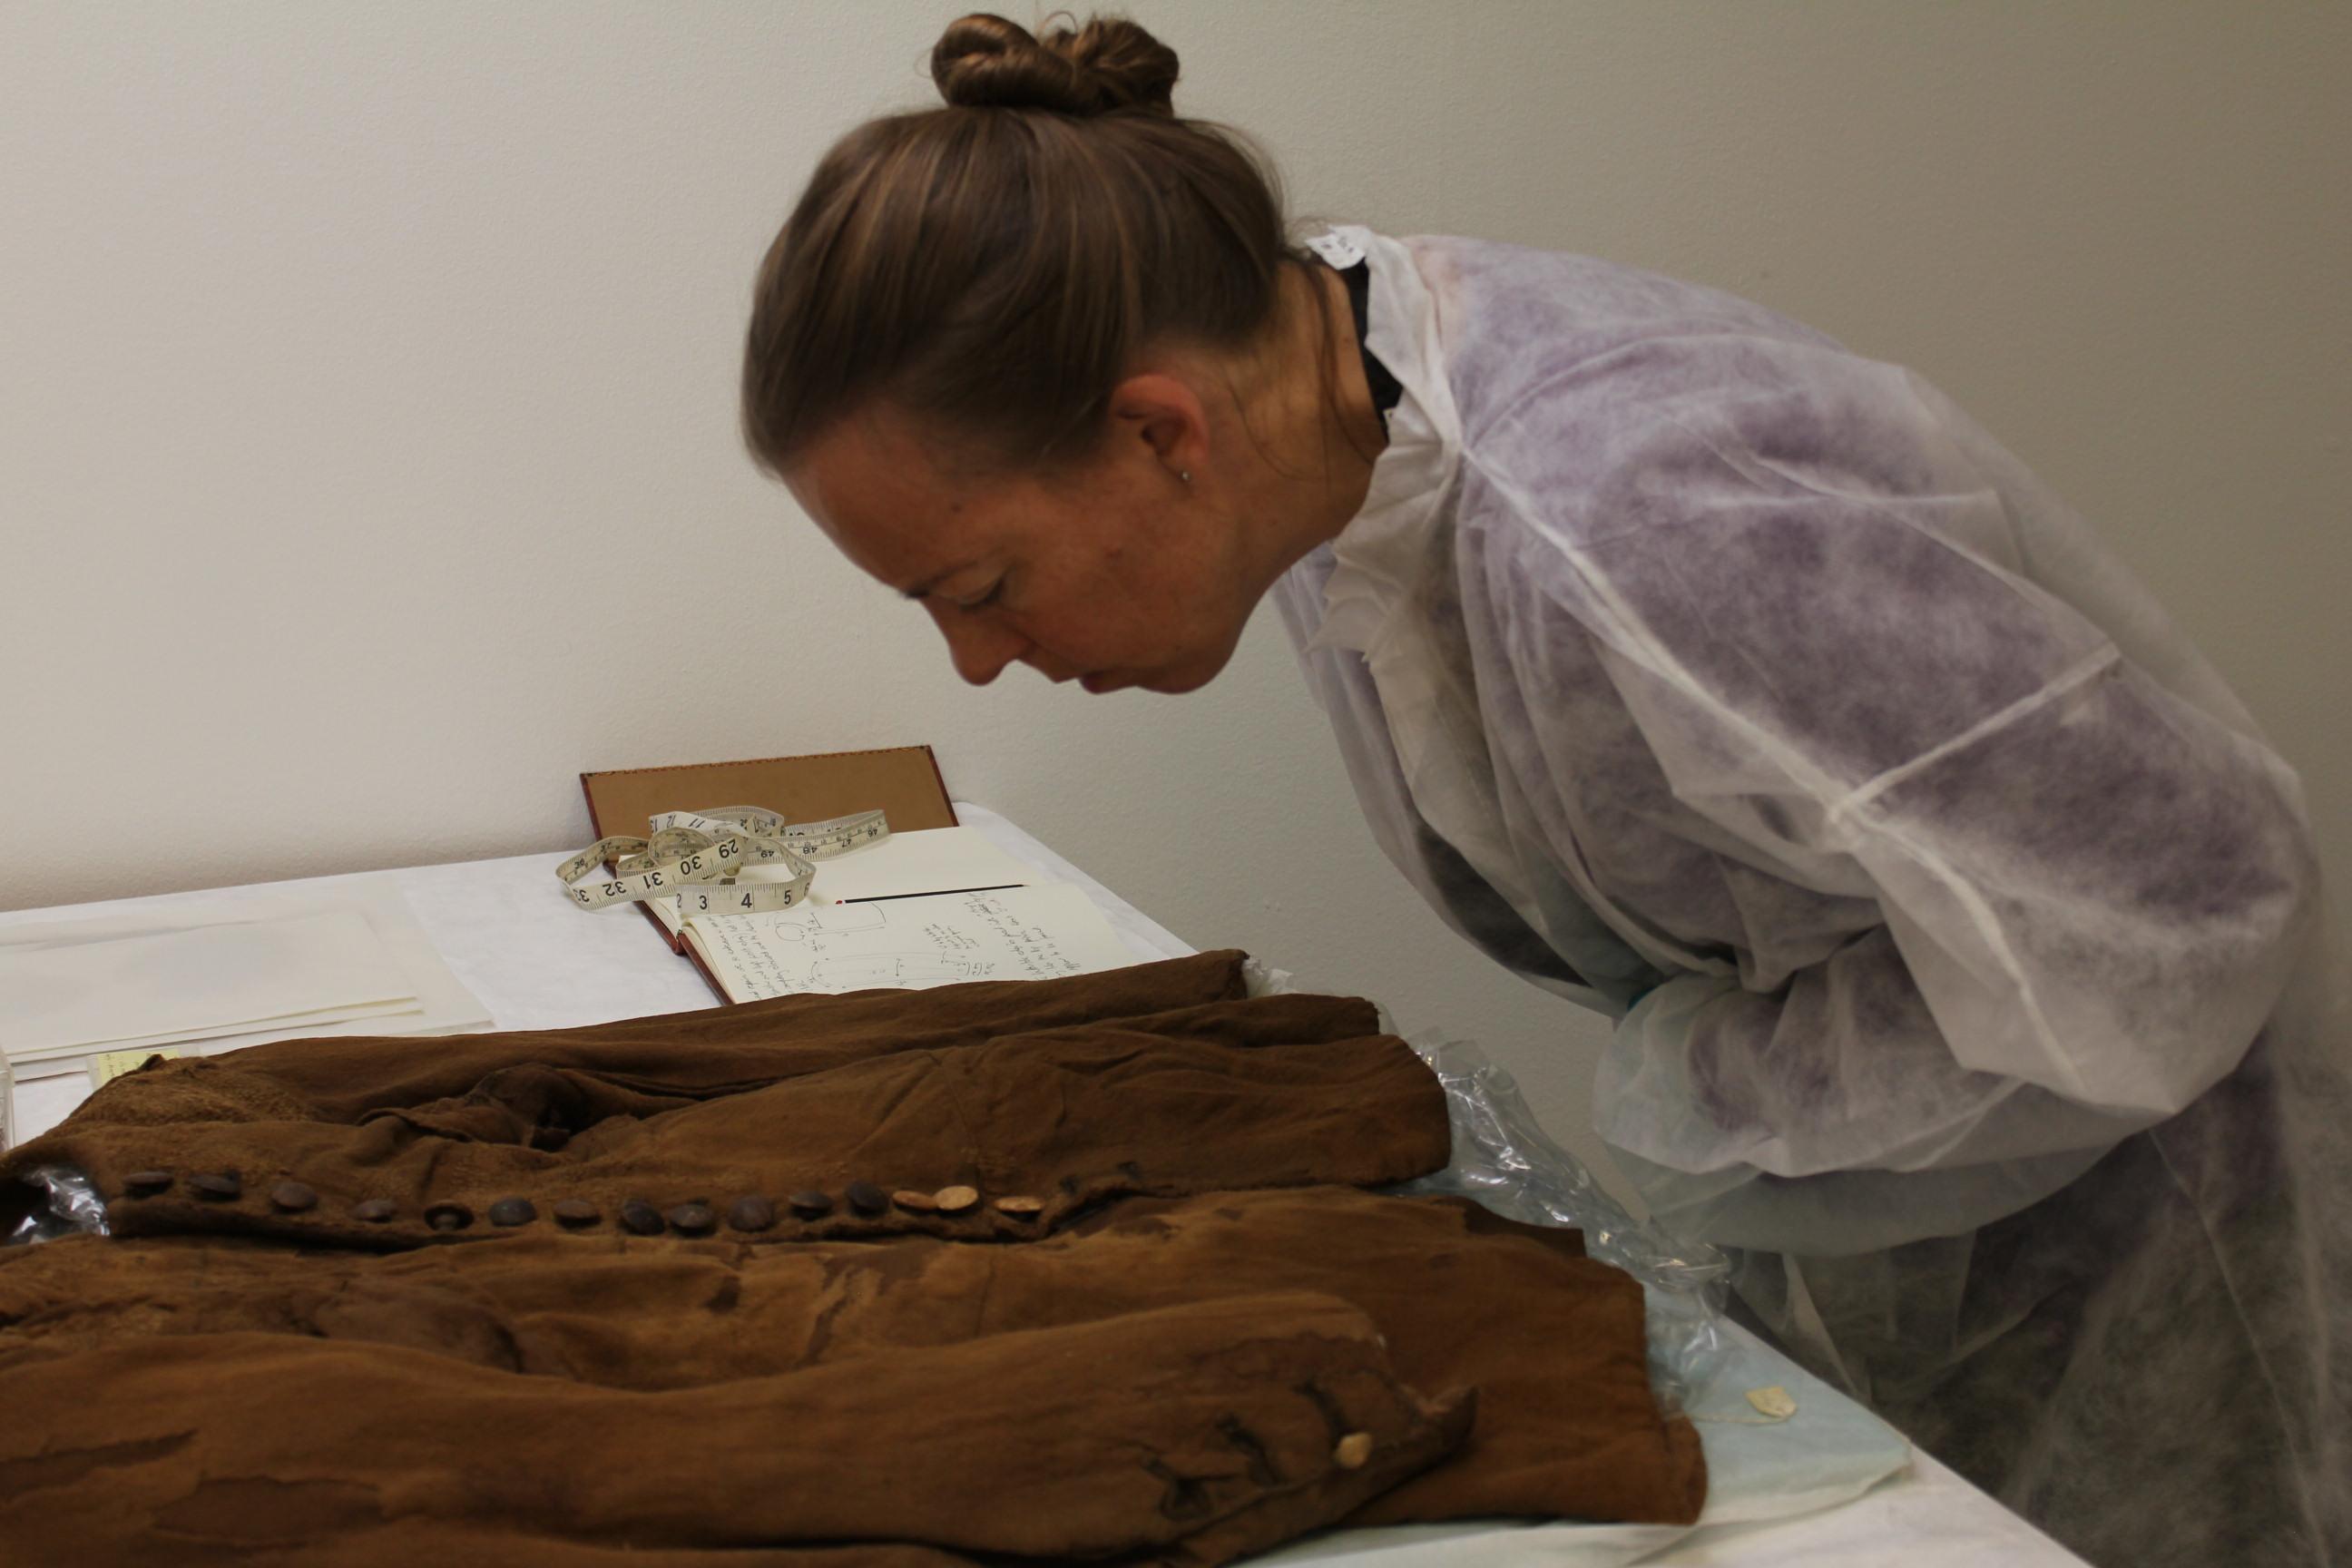 Ninya performing an autopsy at the National Museum of Denmark